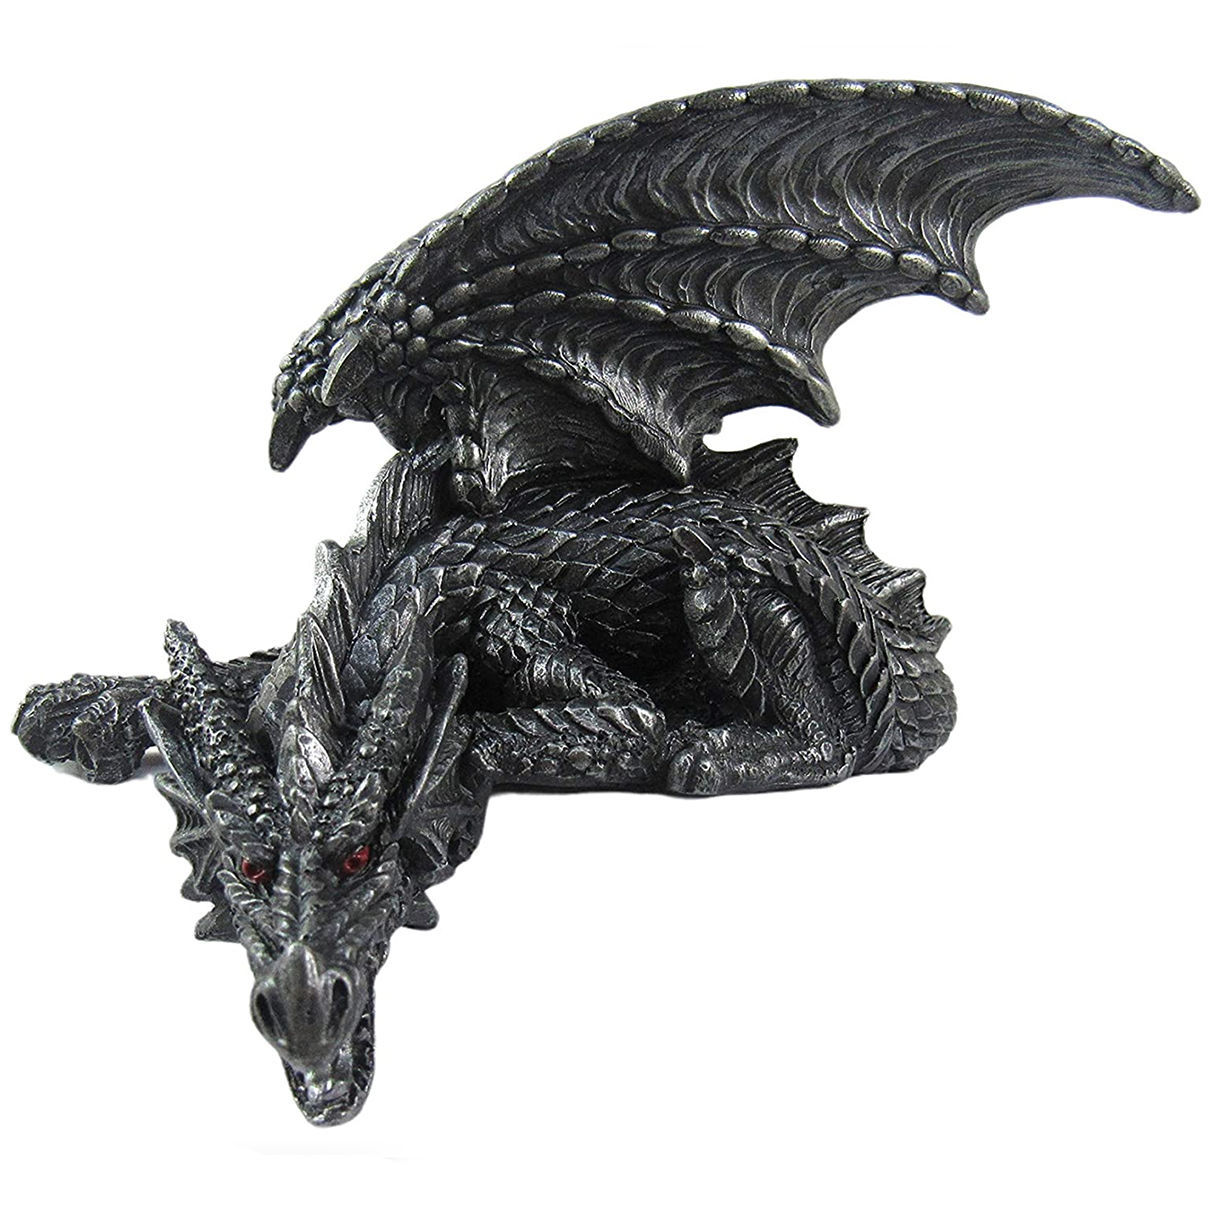 Silent Sentinel Dragon Shelf Sitter has intimidating red eyes and realistically sculpted details, hand painted polyresin 